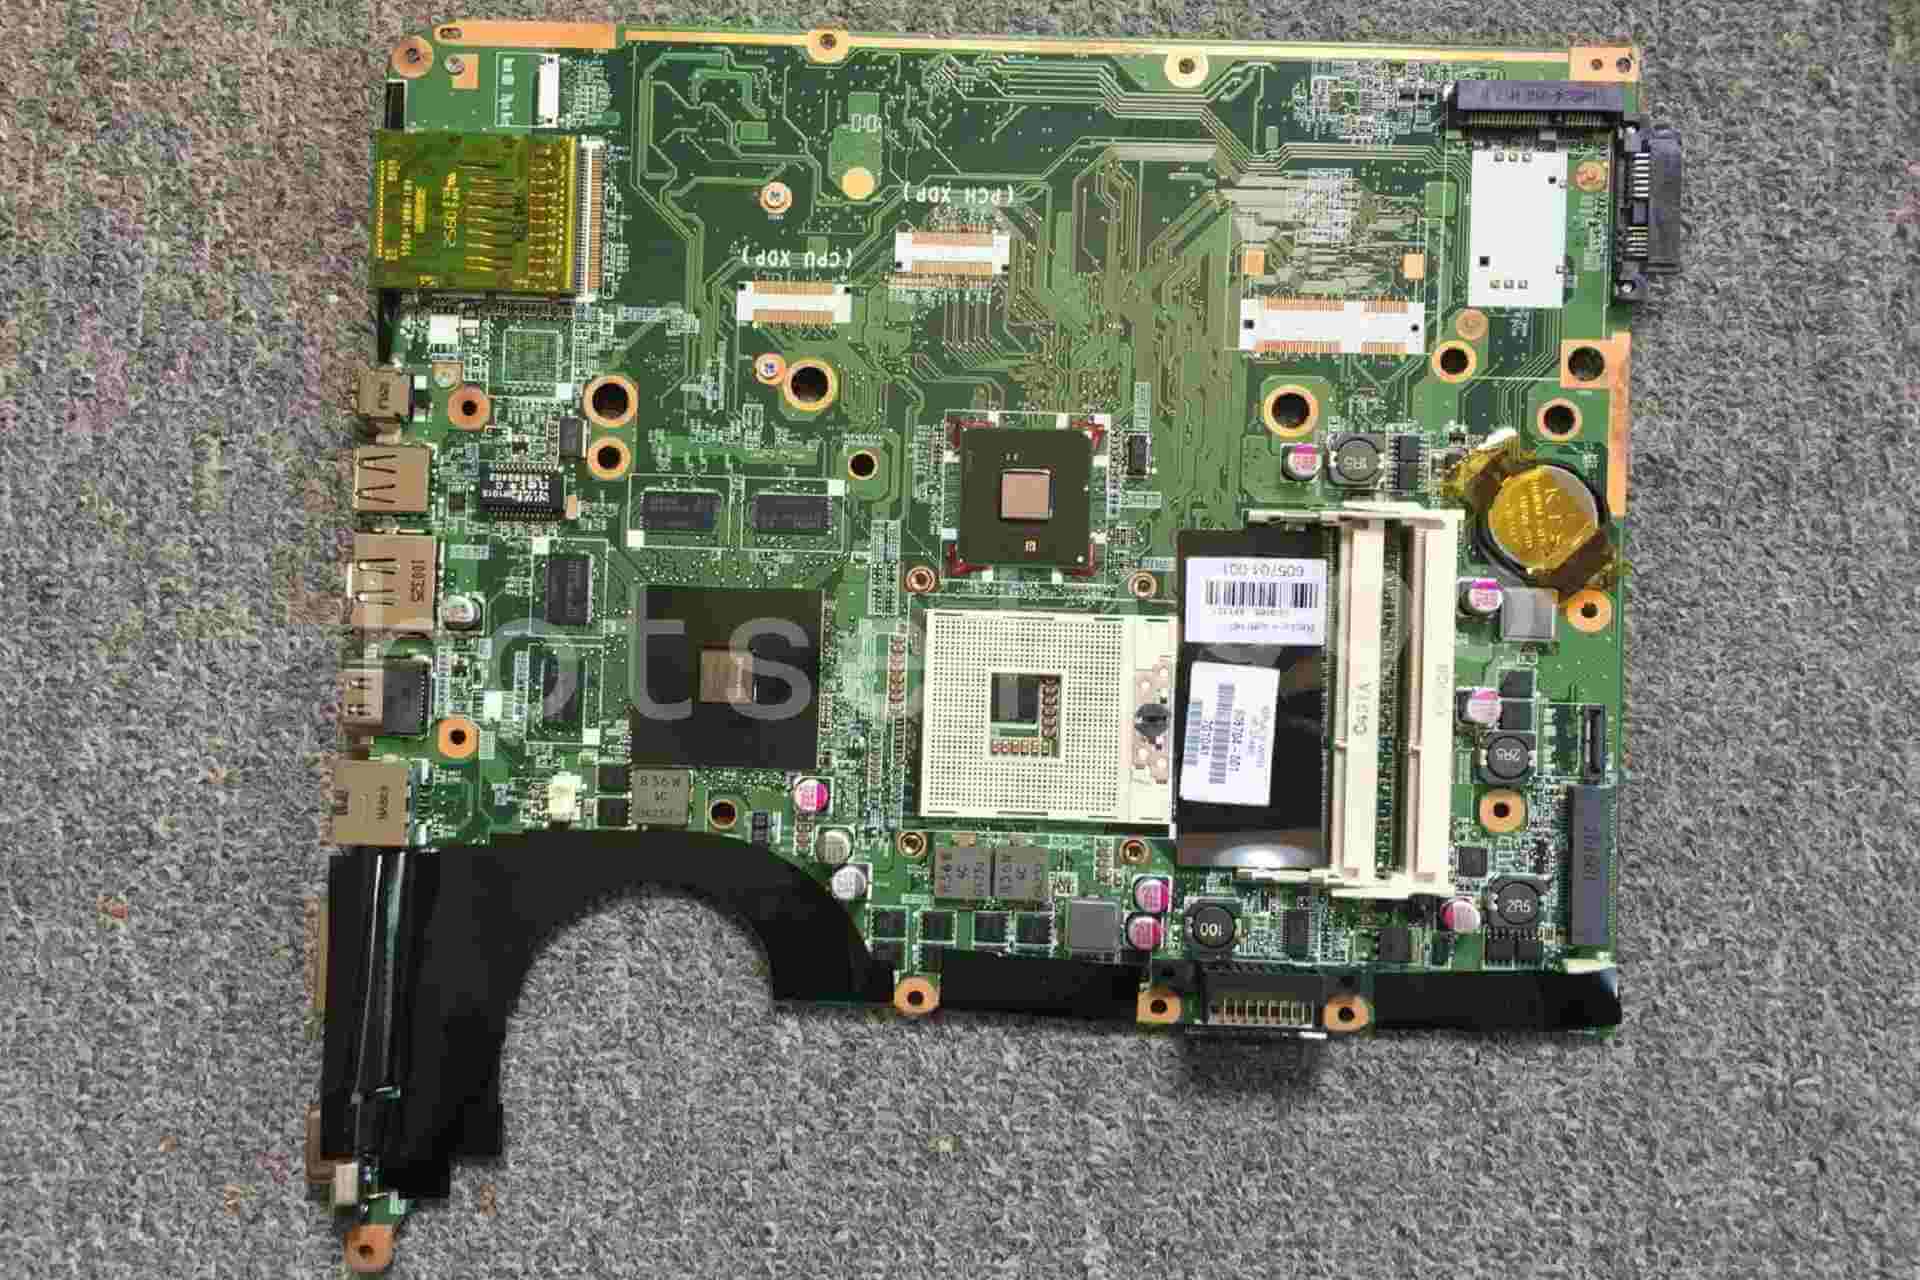 How to find Motherboard model